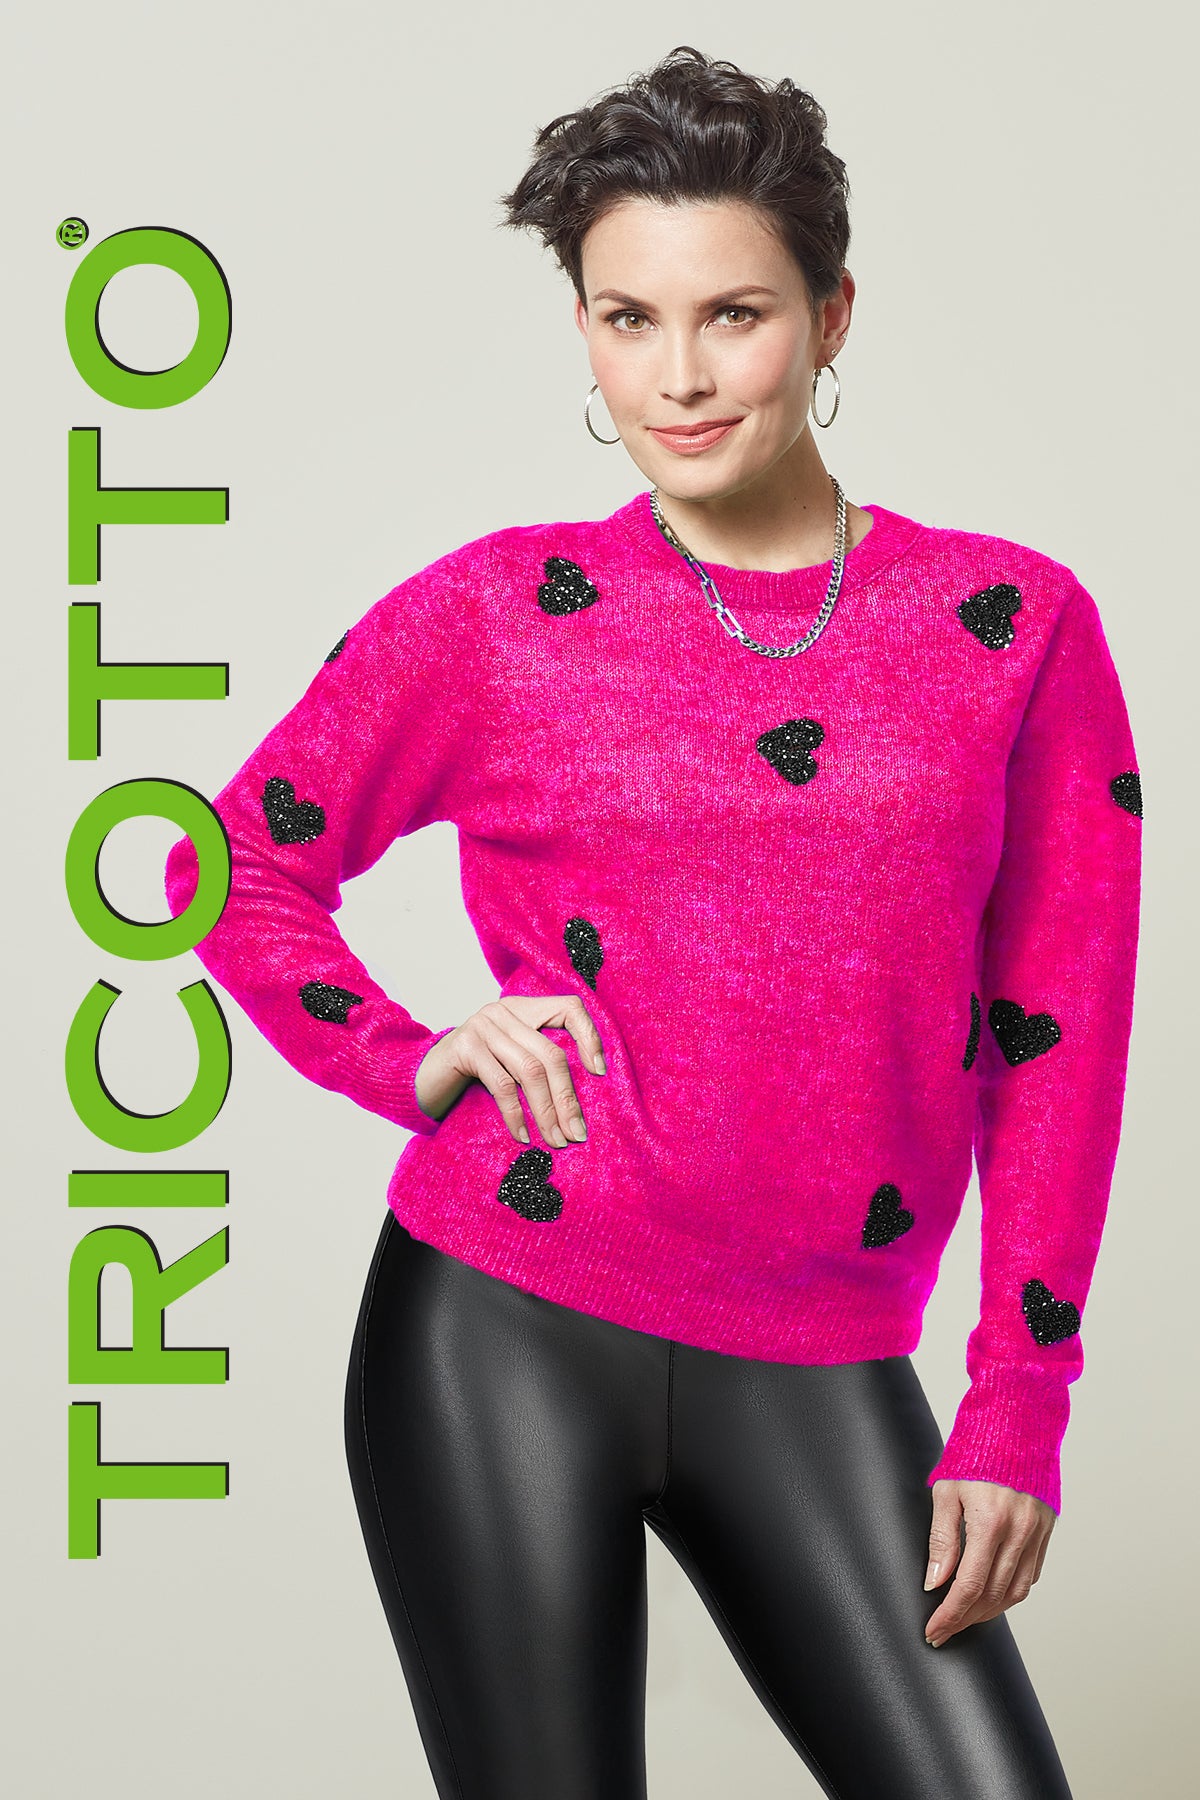 Tricotto Pink Sweater-Buy Tricotto Sweaters Online-Online Sweater Shop-Tricotto Clothing Montreal